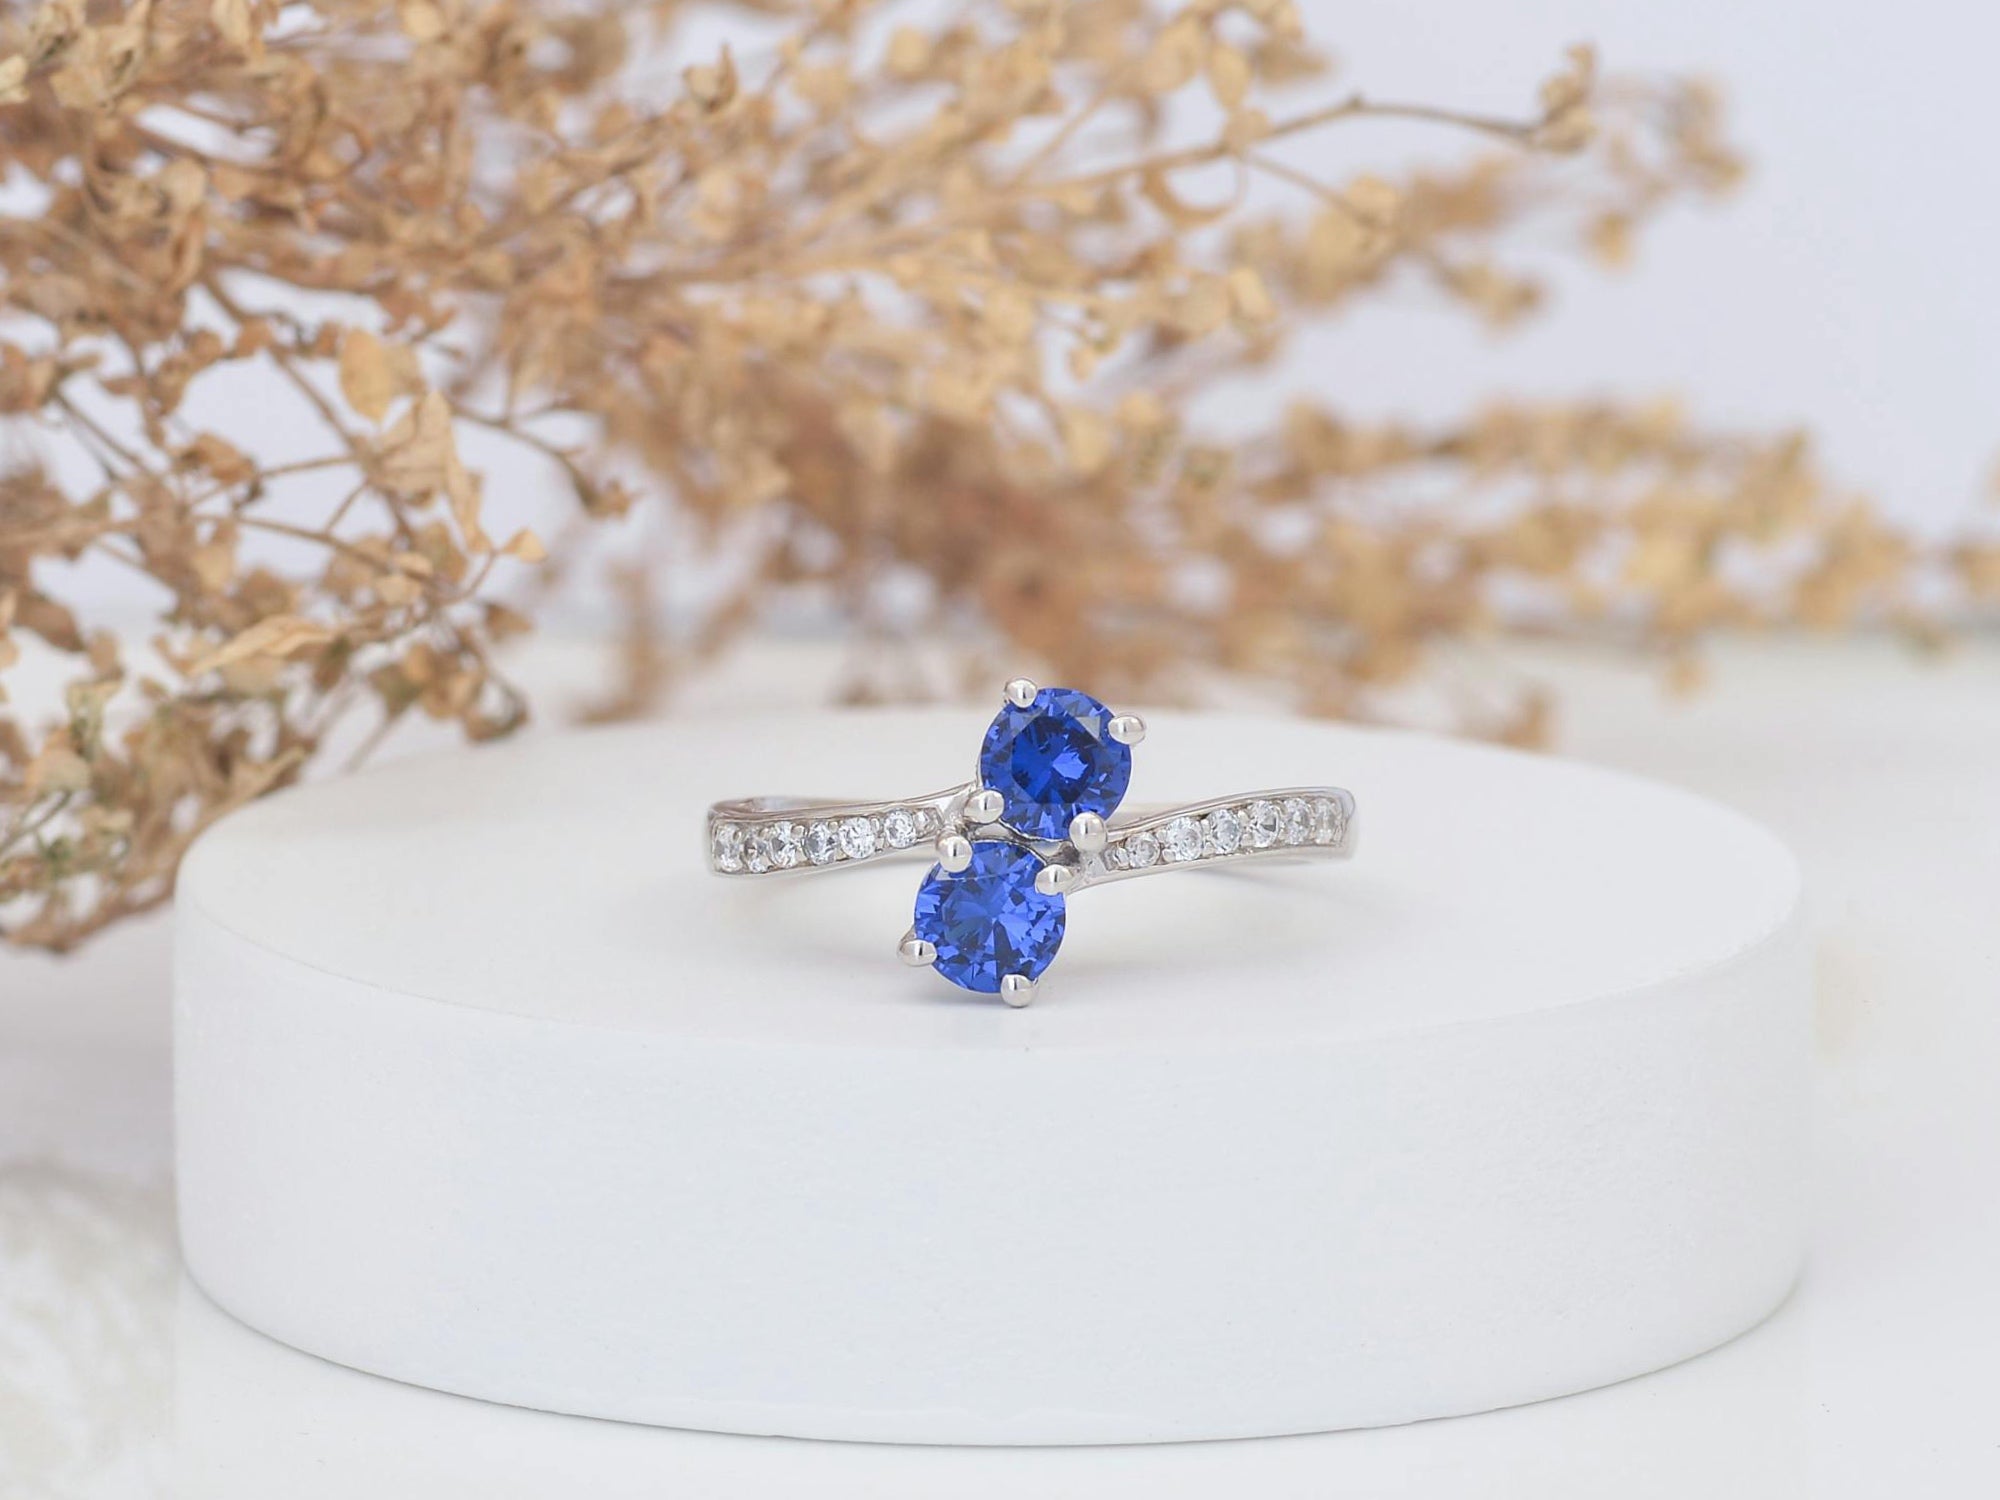 Sapphire Rings Holiday Gift Guide for Timeless Glamour | Sheena Stone